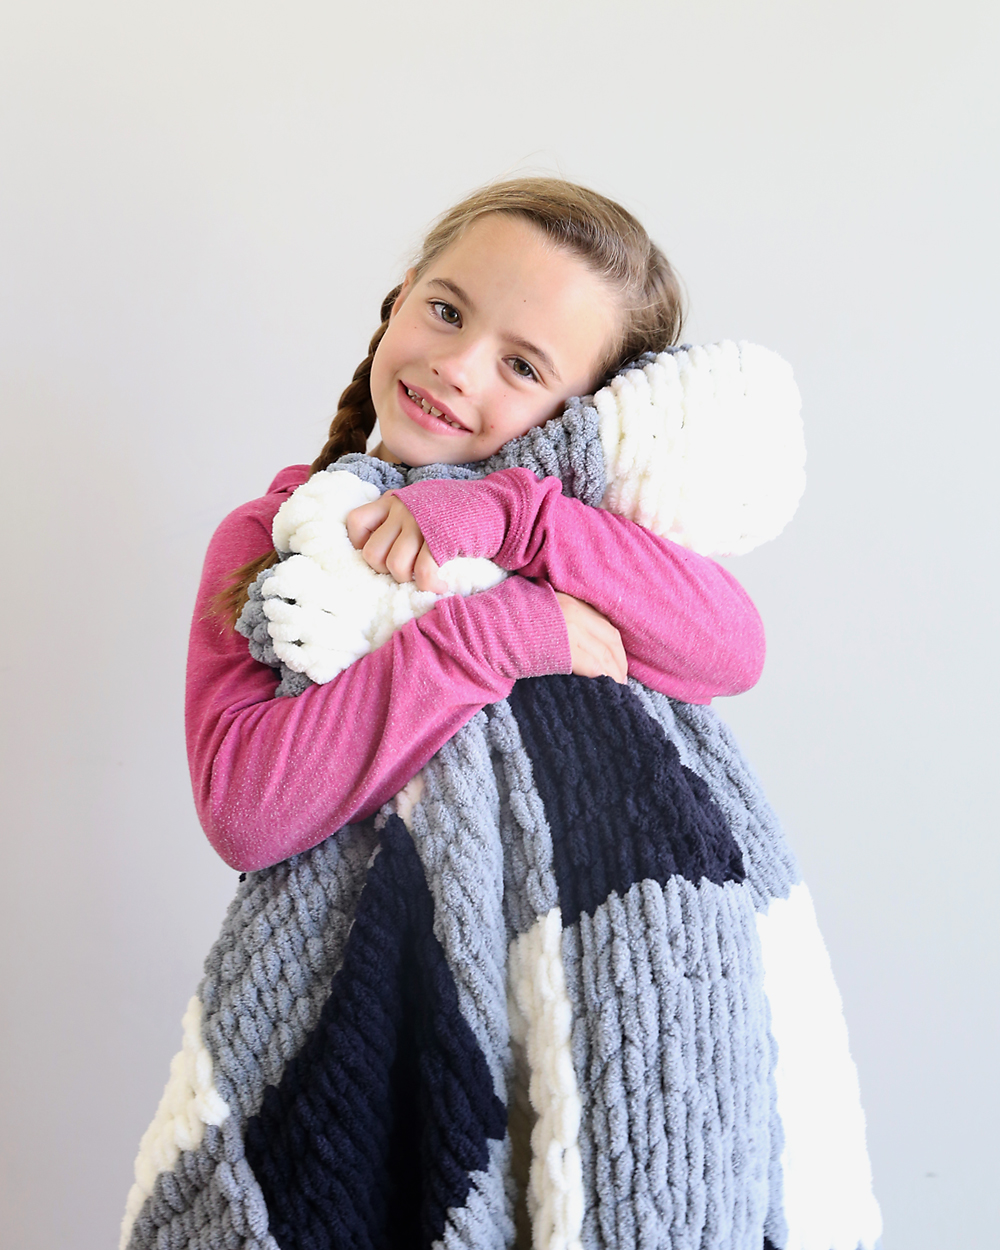 Girl snuggling with a finger knit blanket made from loop yarn